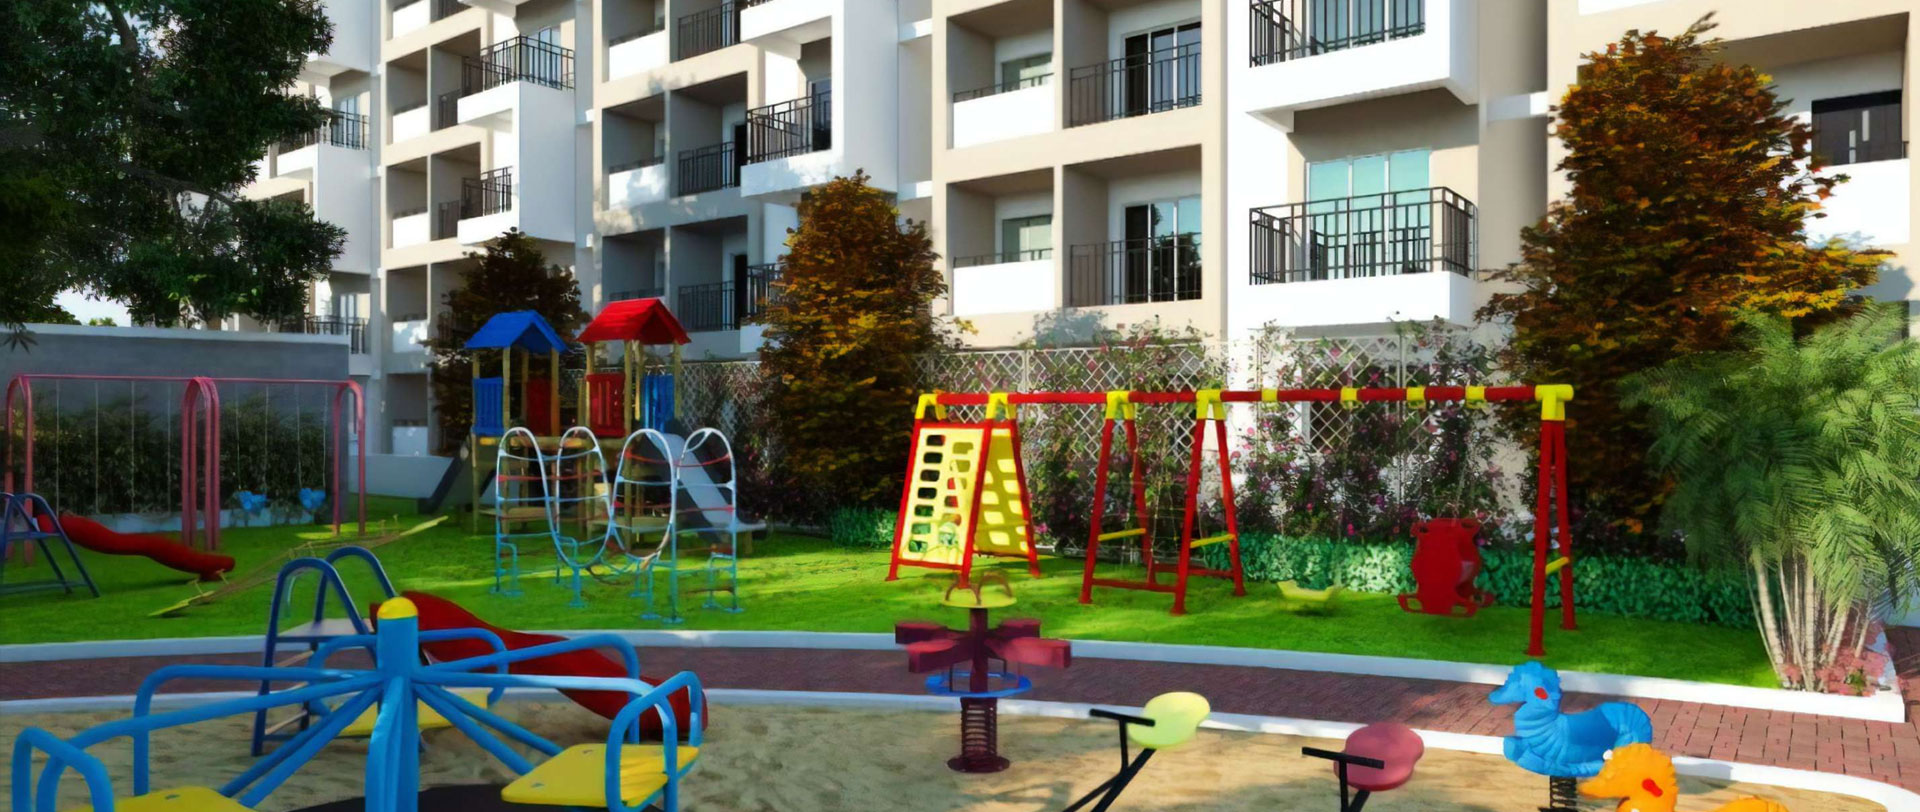 3 Bhk Apartments for Sale in Hoskote